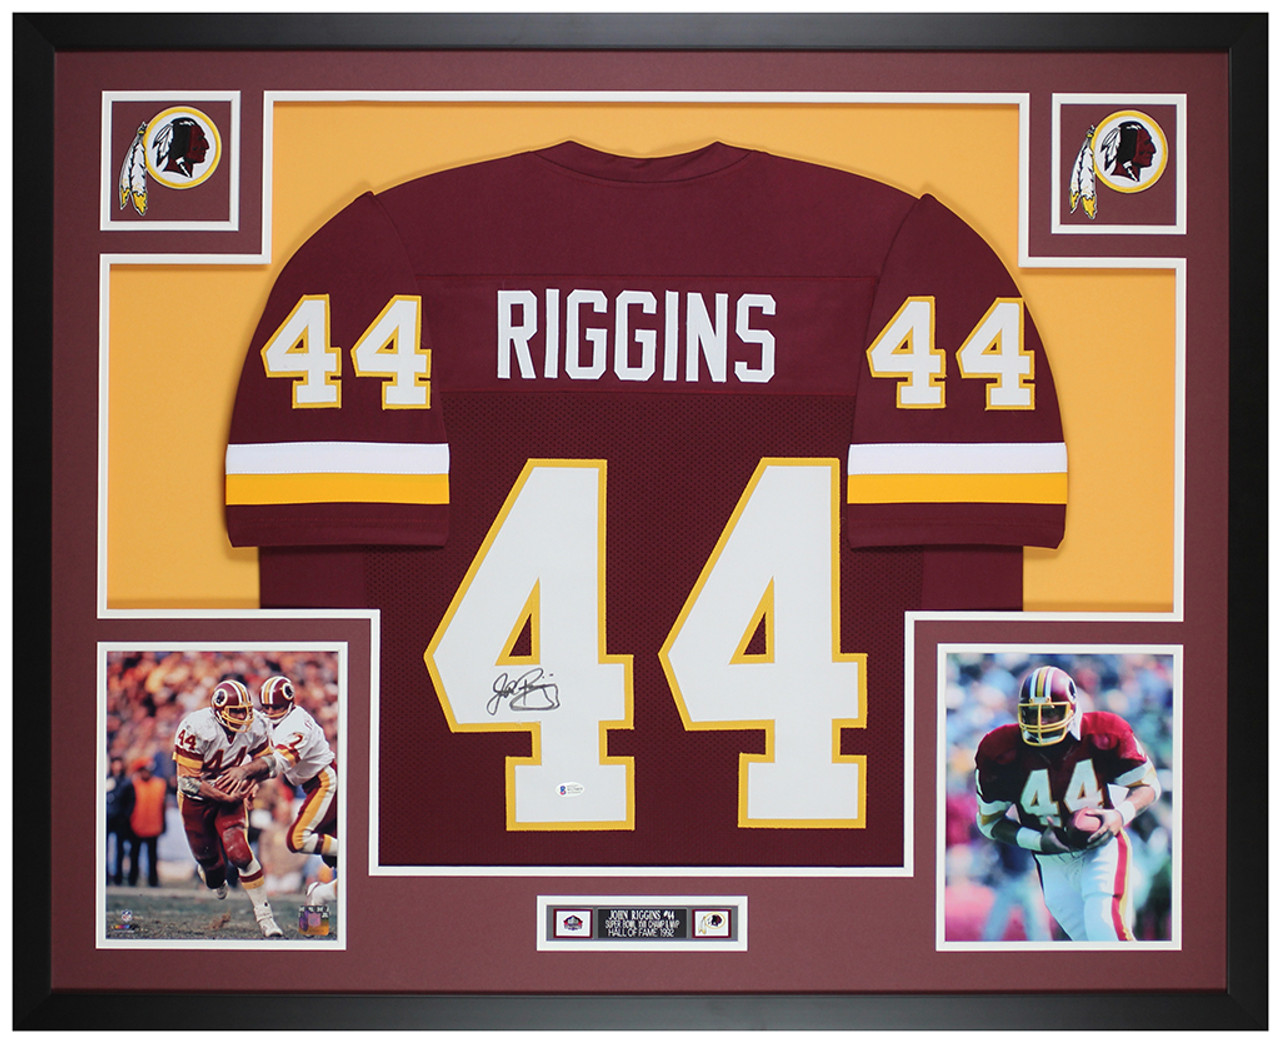 redskins jersey with logo